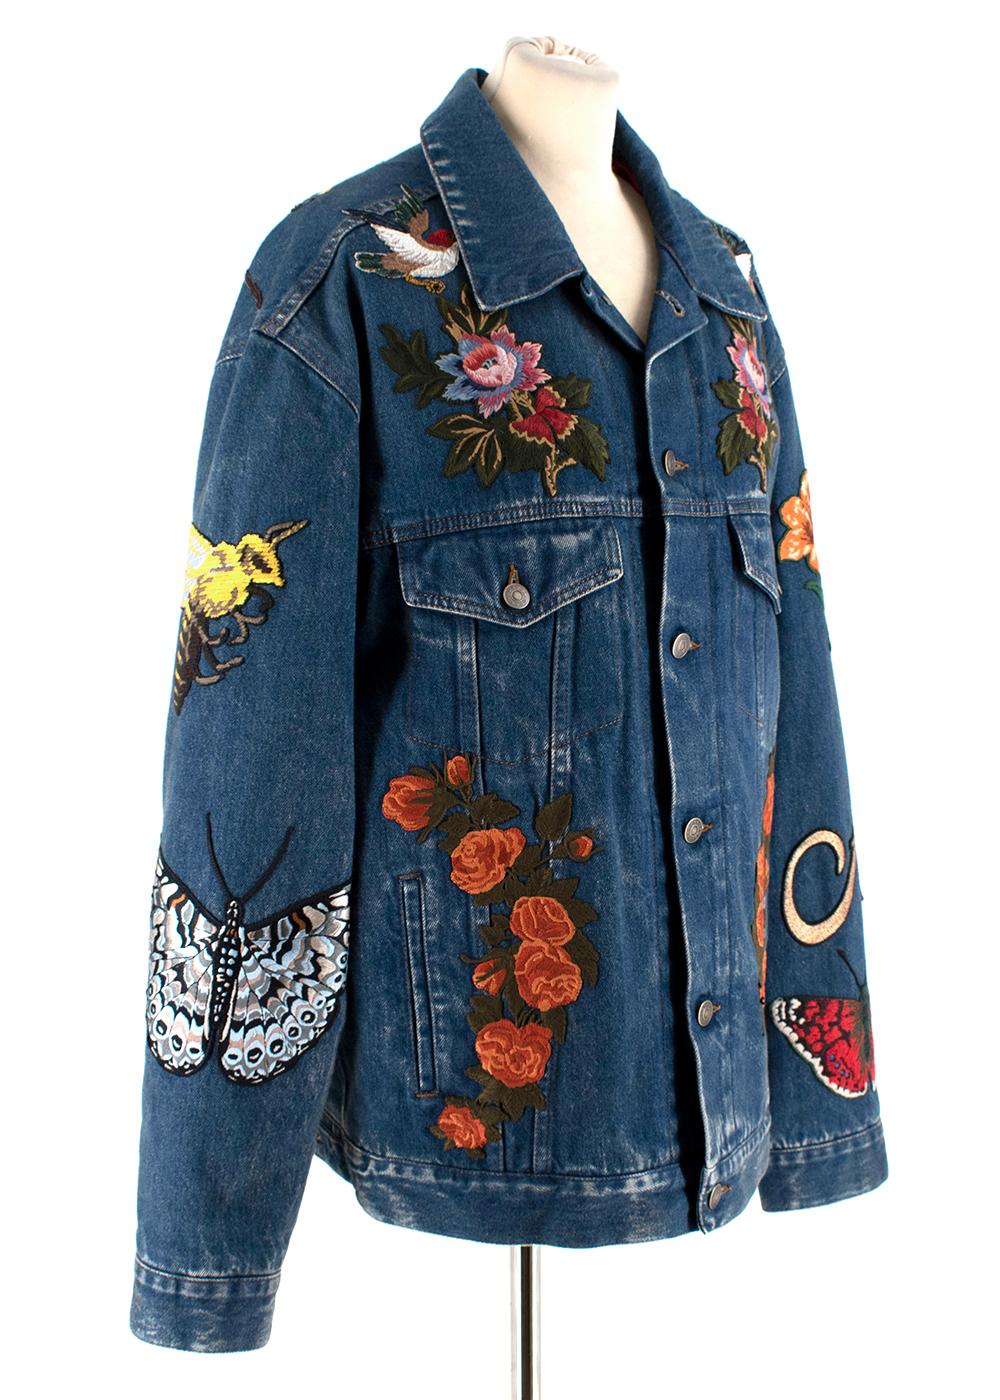 Gucci Embroidered Denim Jacket 

-Adorned with a mix of floral embroideries 
-Collections most recognizable motifs, including the butterfly, bee, tiger and the phrase 